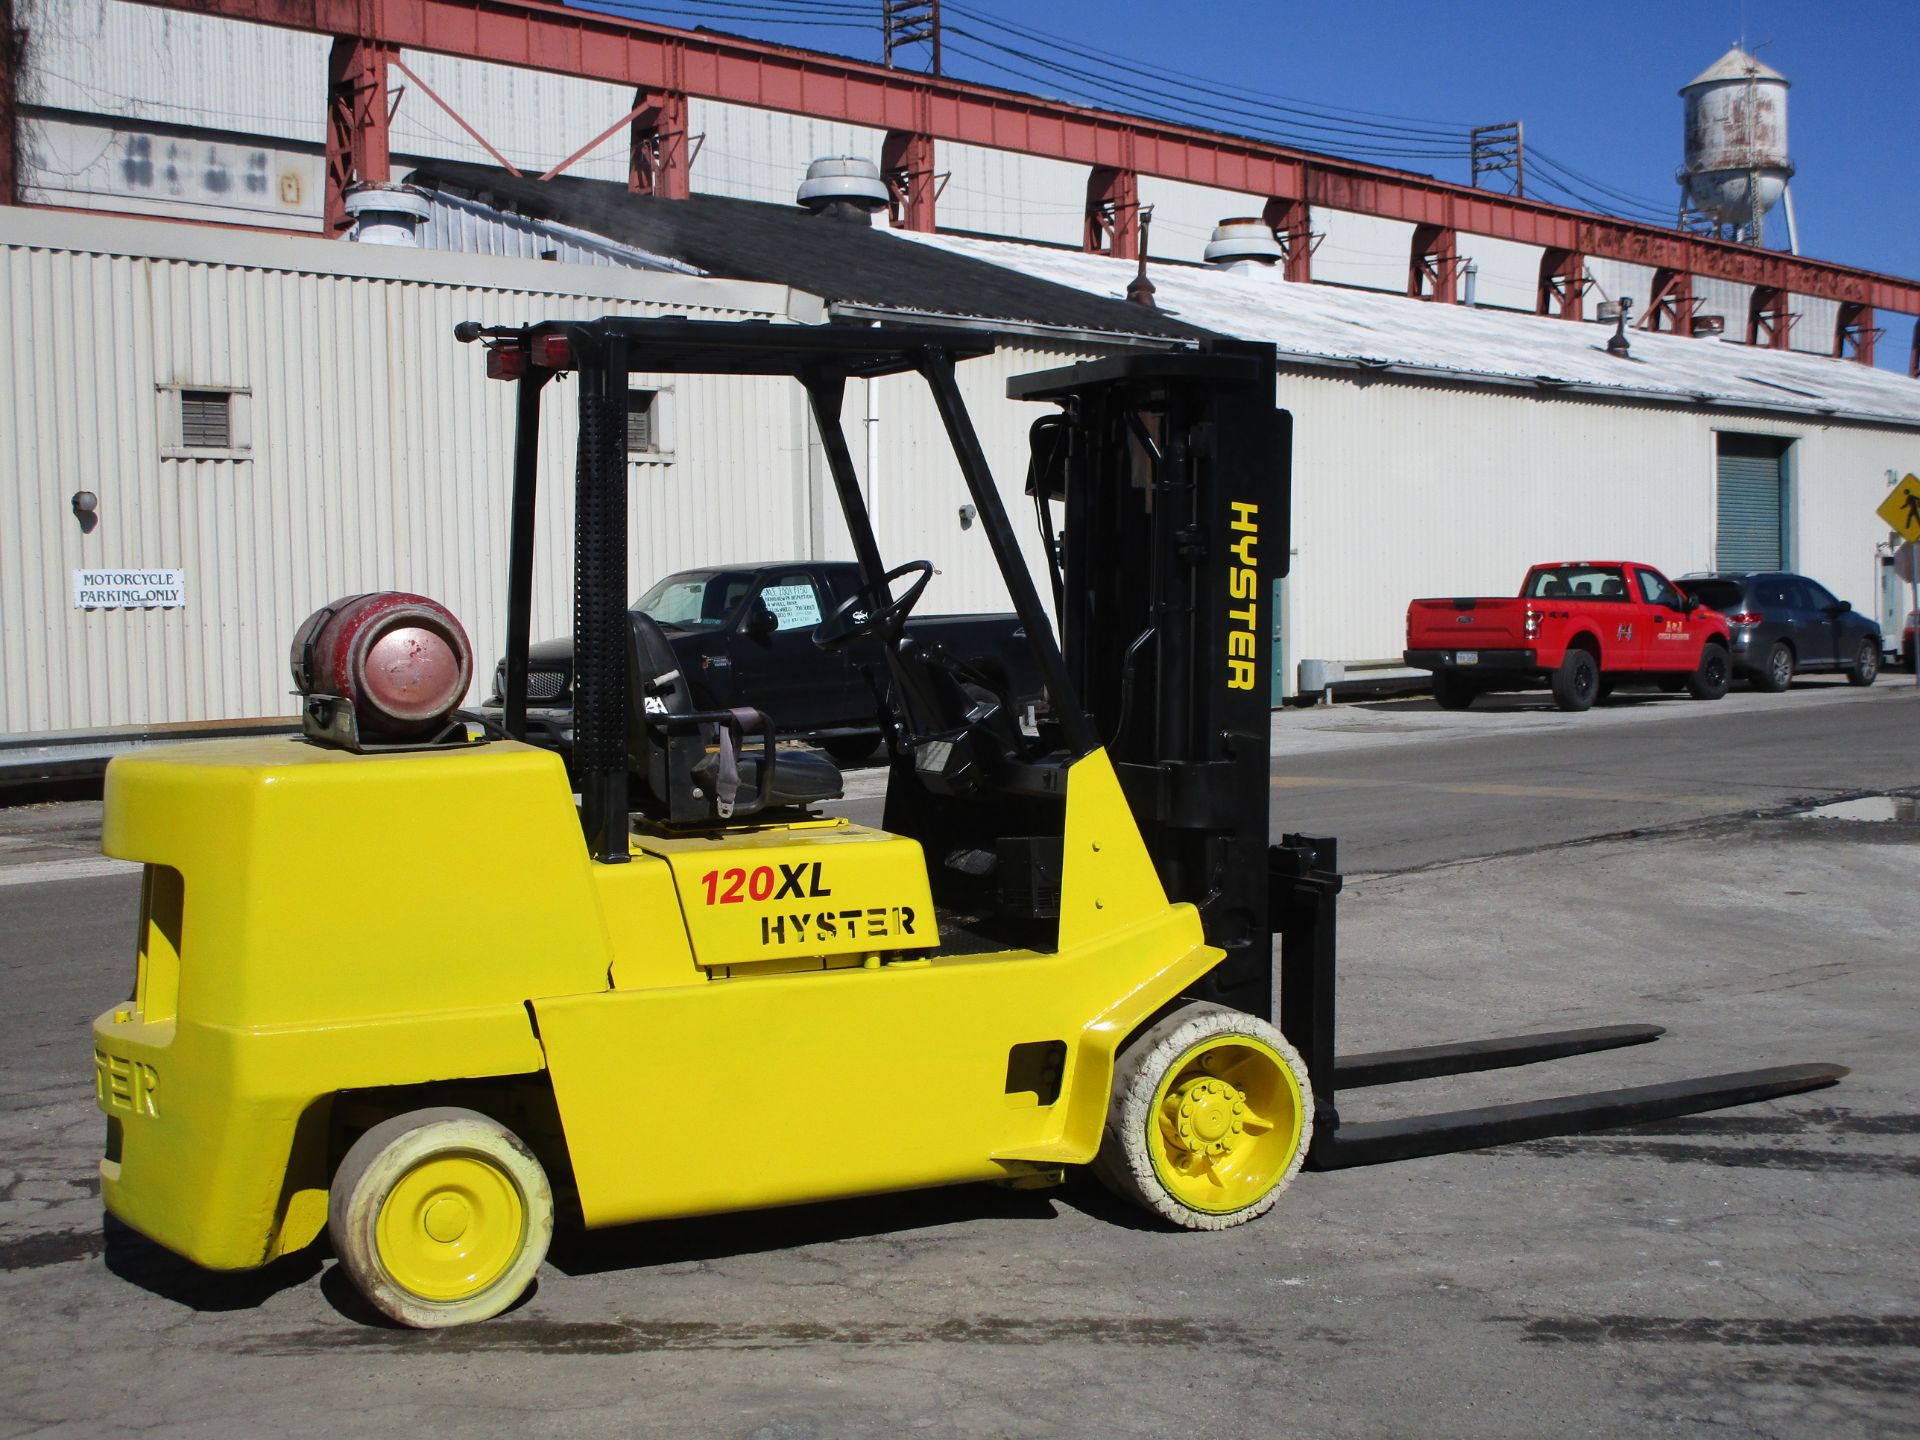 Hyster S120XL 12,000lb Forklift - Image 8 of 17